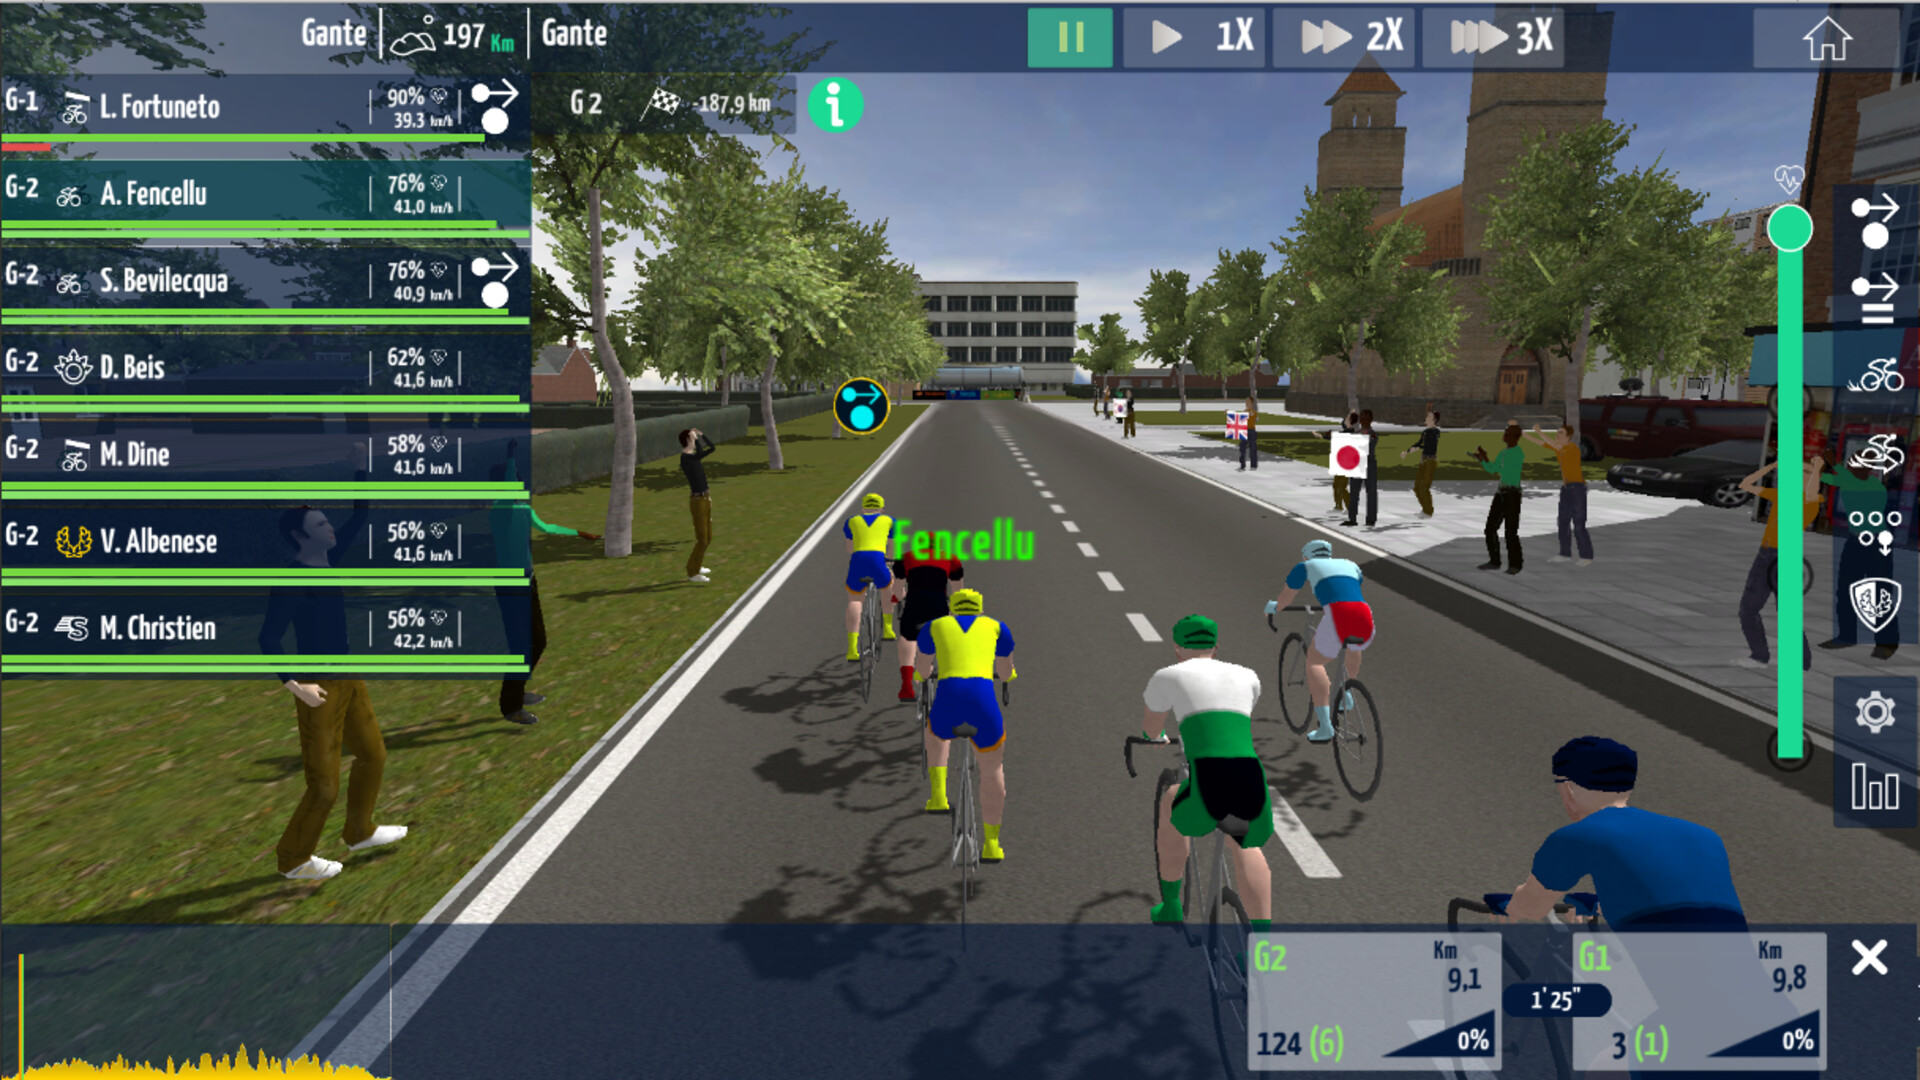 Live Cycling Manager 2022 Steam CD Key